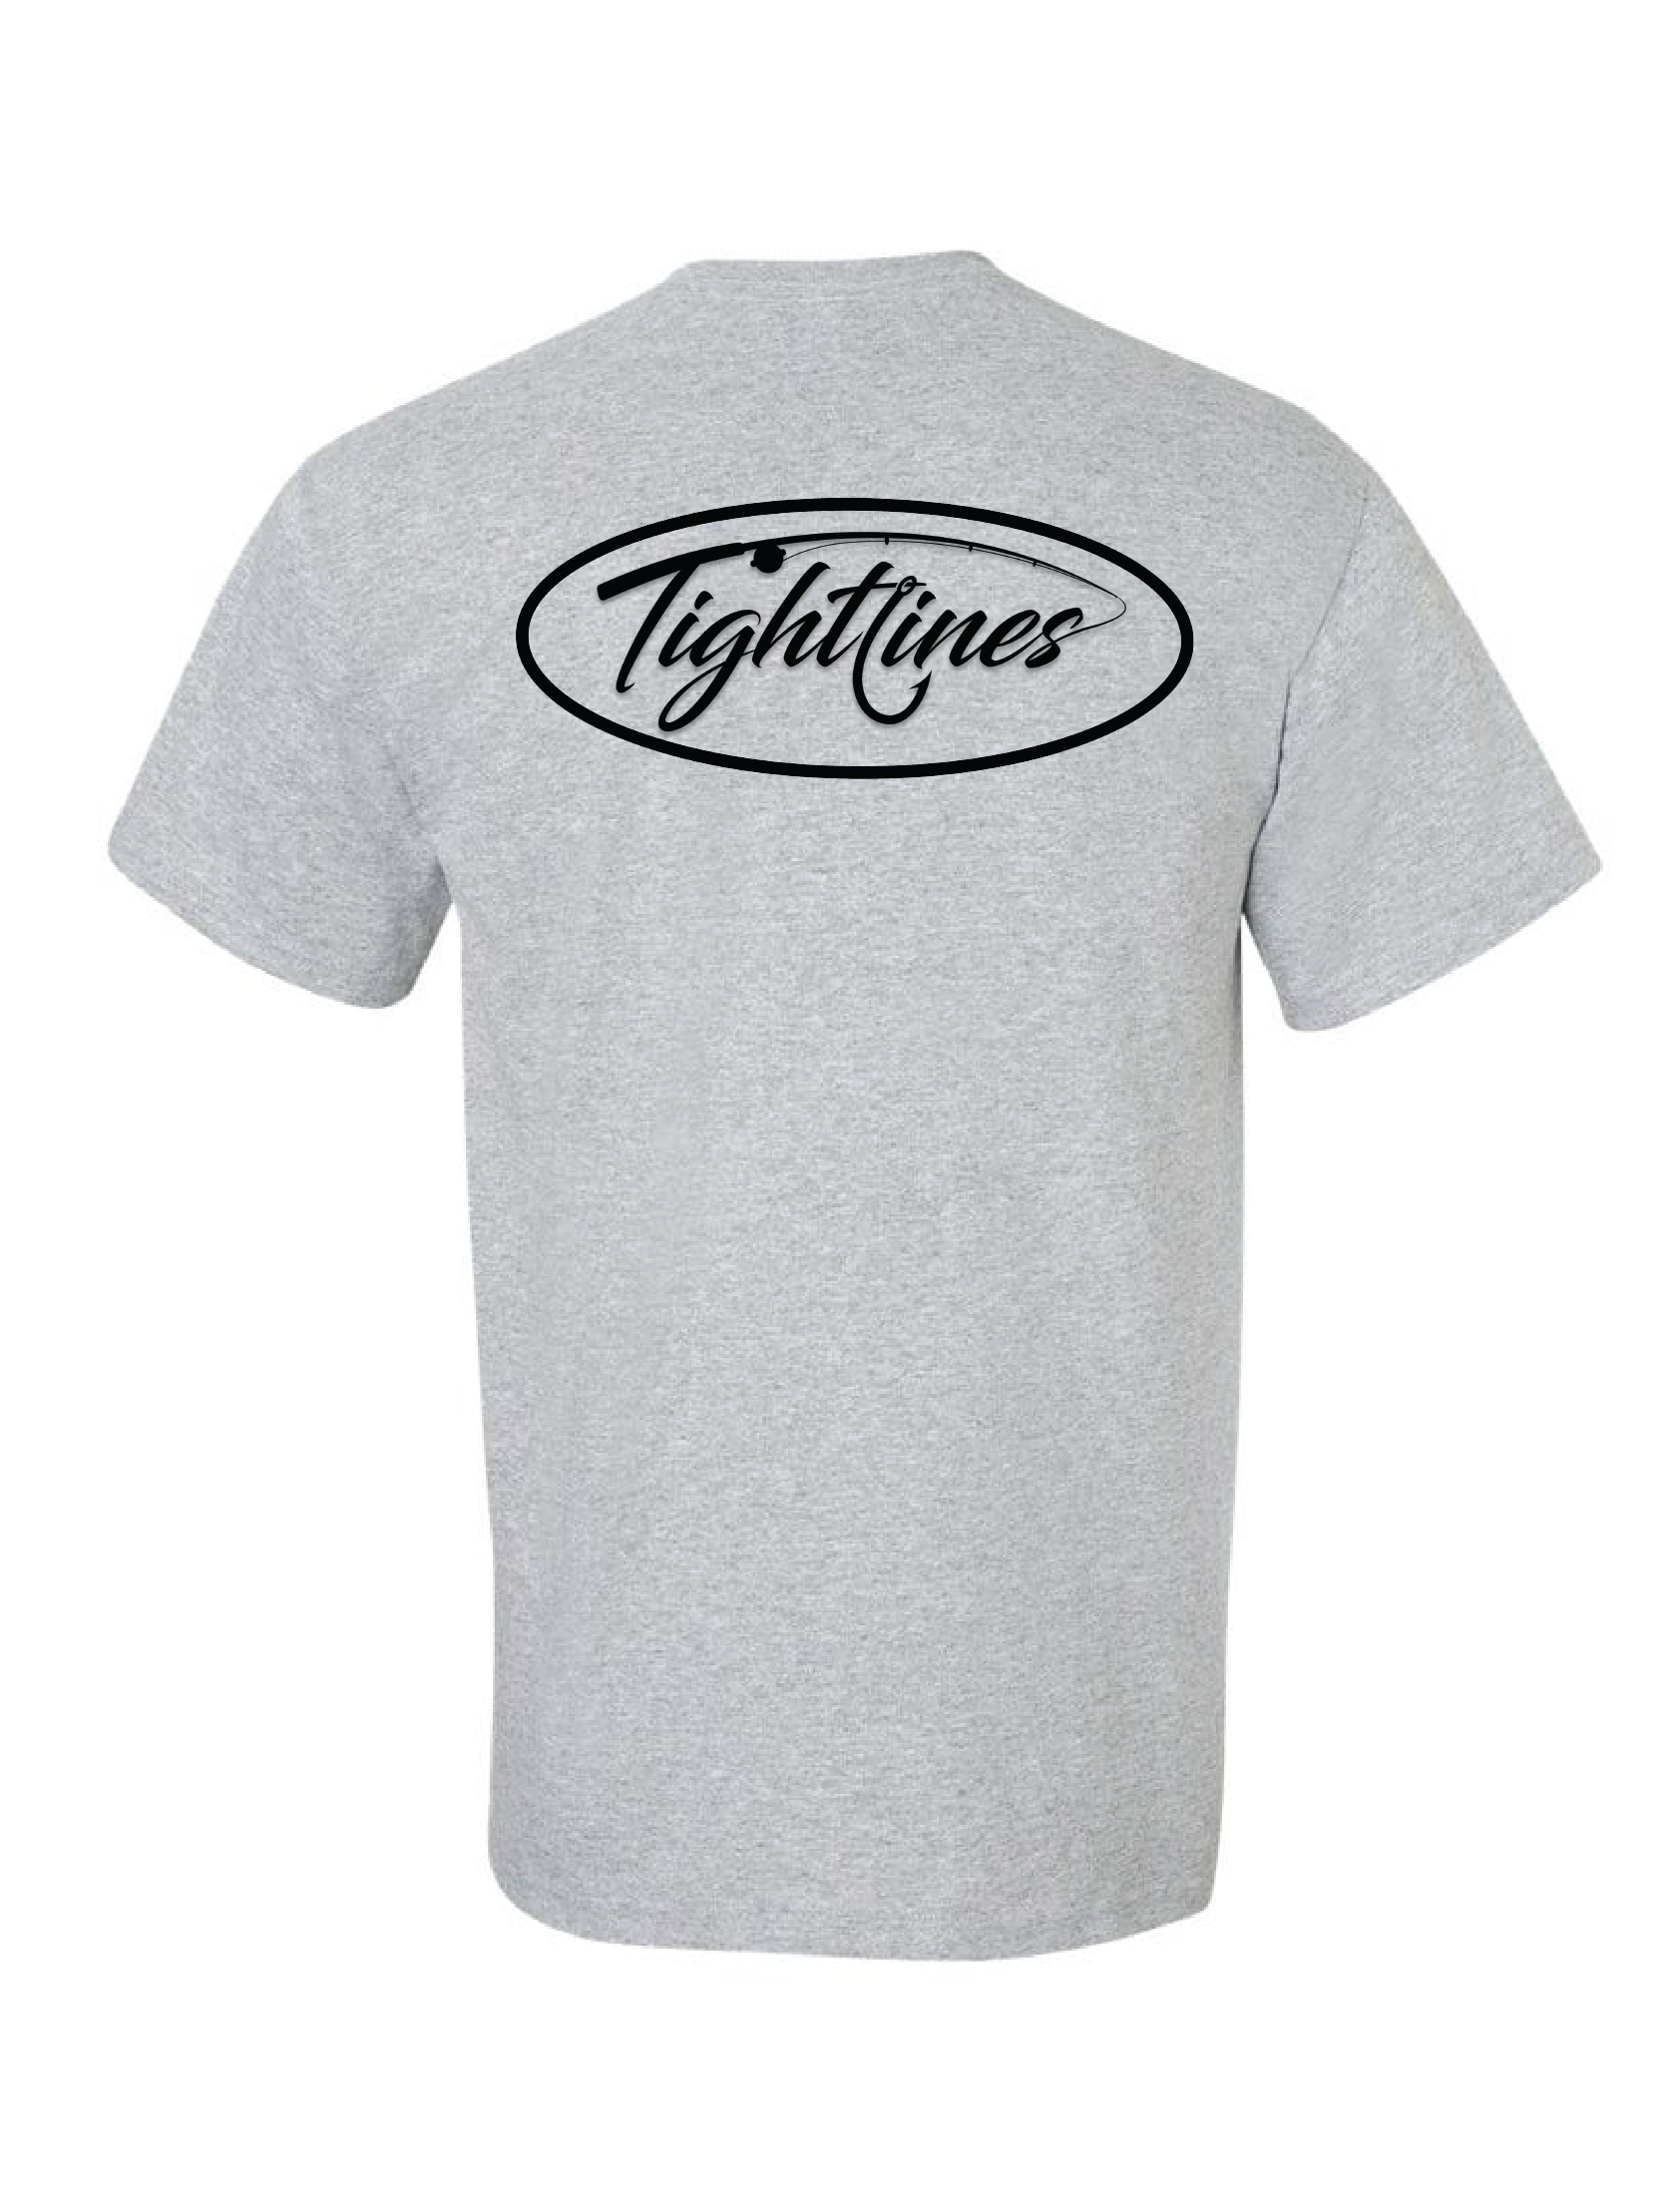 TightLines Socal Lucky Fishing Shirt – TightlinesSocal